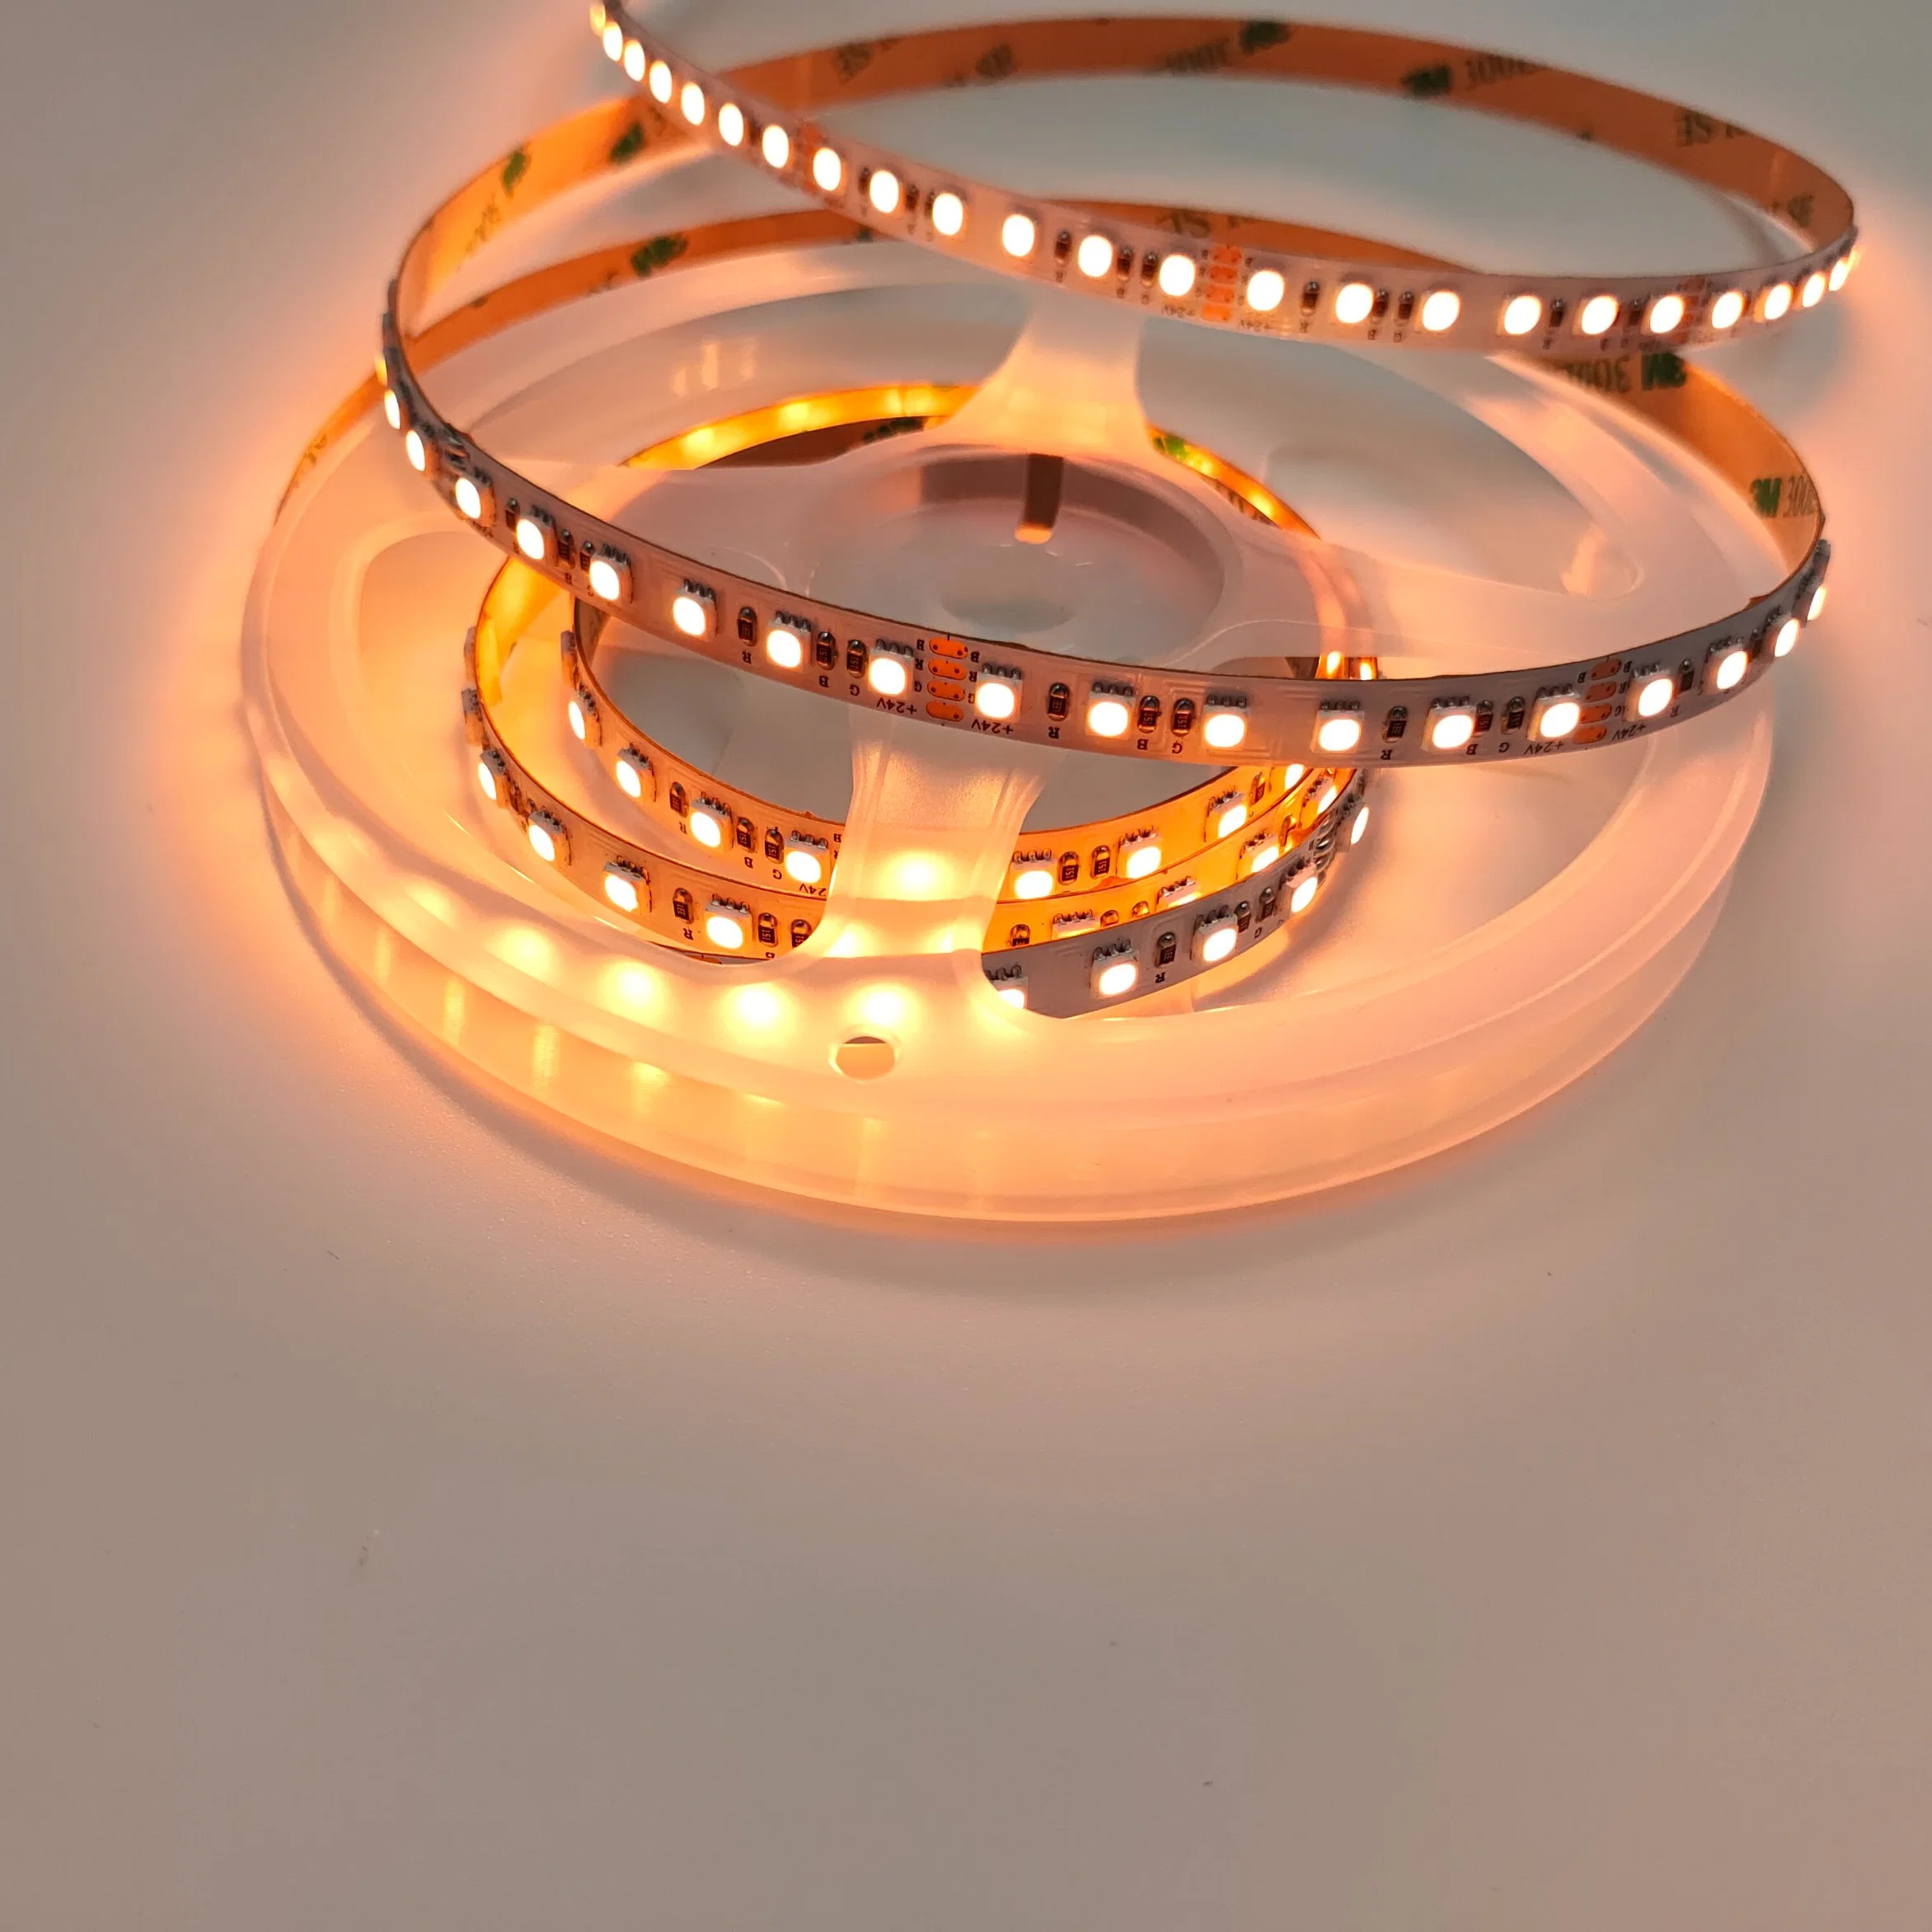 RGB Flexible Waterproof LED Strip 24V RGB 3838 120LEDs 14.4W/M 5m/Roll Outdoor Decoration LED RGB Light Strip with FCC CCC LVD EMC RoHS CE Certification